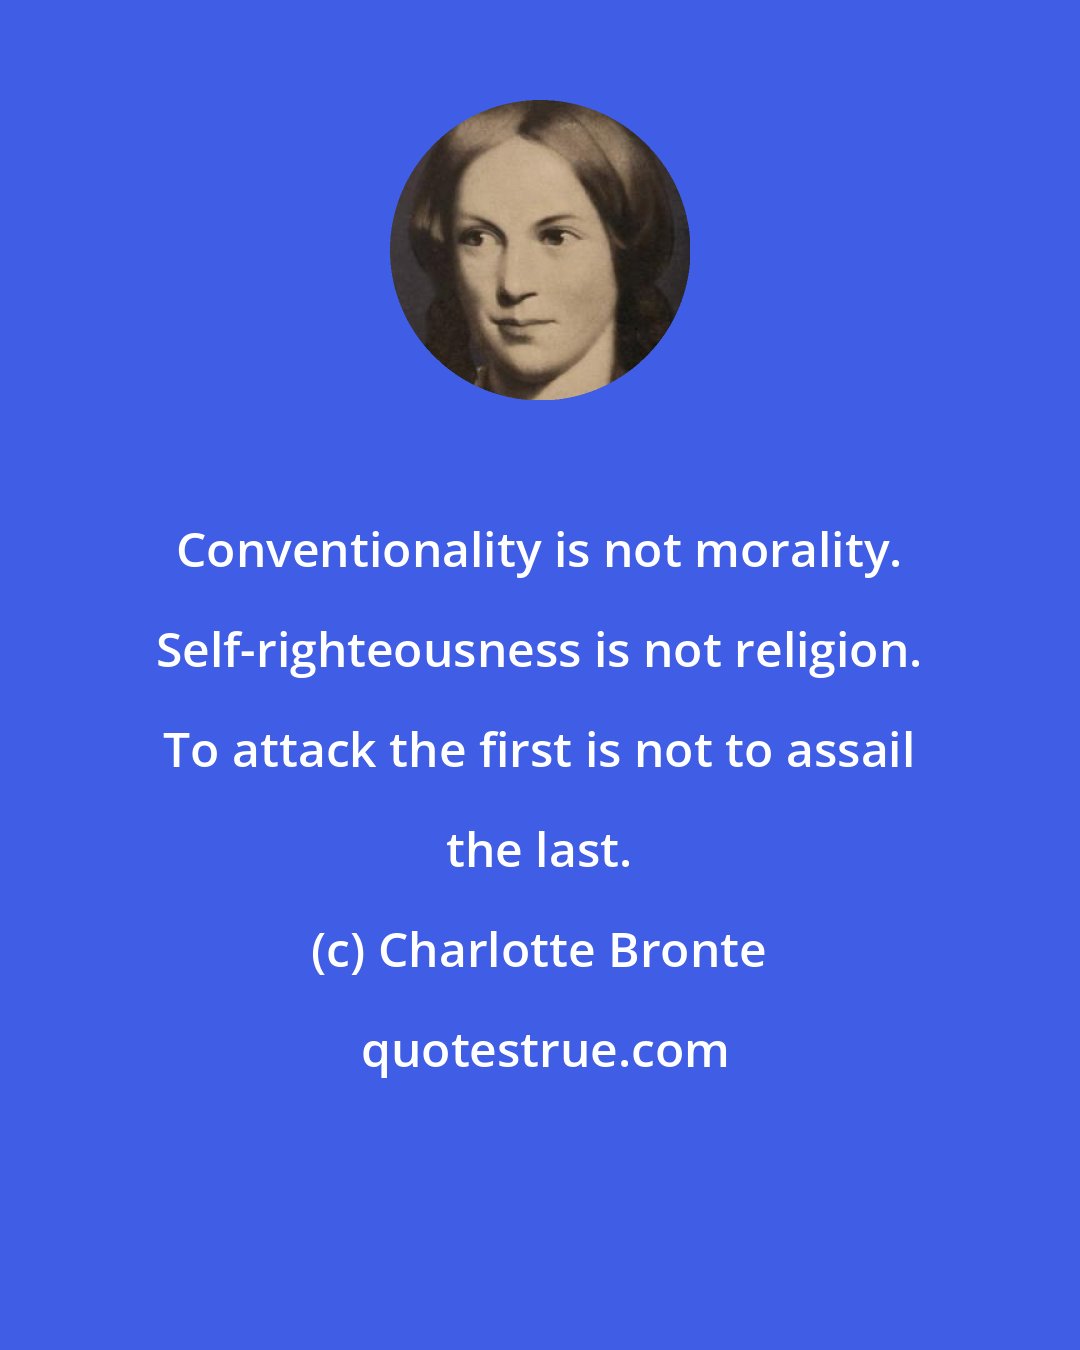 Charlotte Bronte: Conventionality is not morality. Self-righteousness is not religion. To attack the first is not to assail the last.